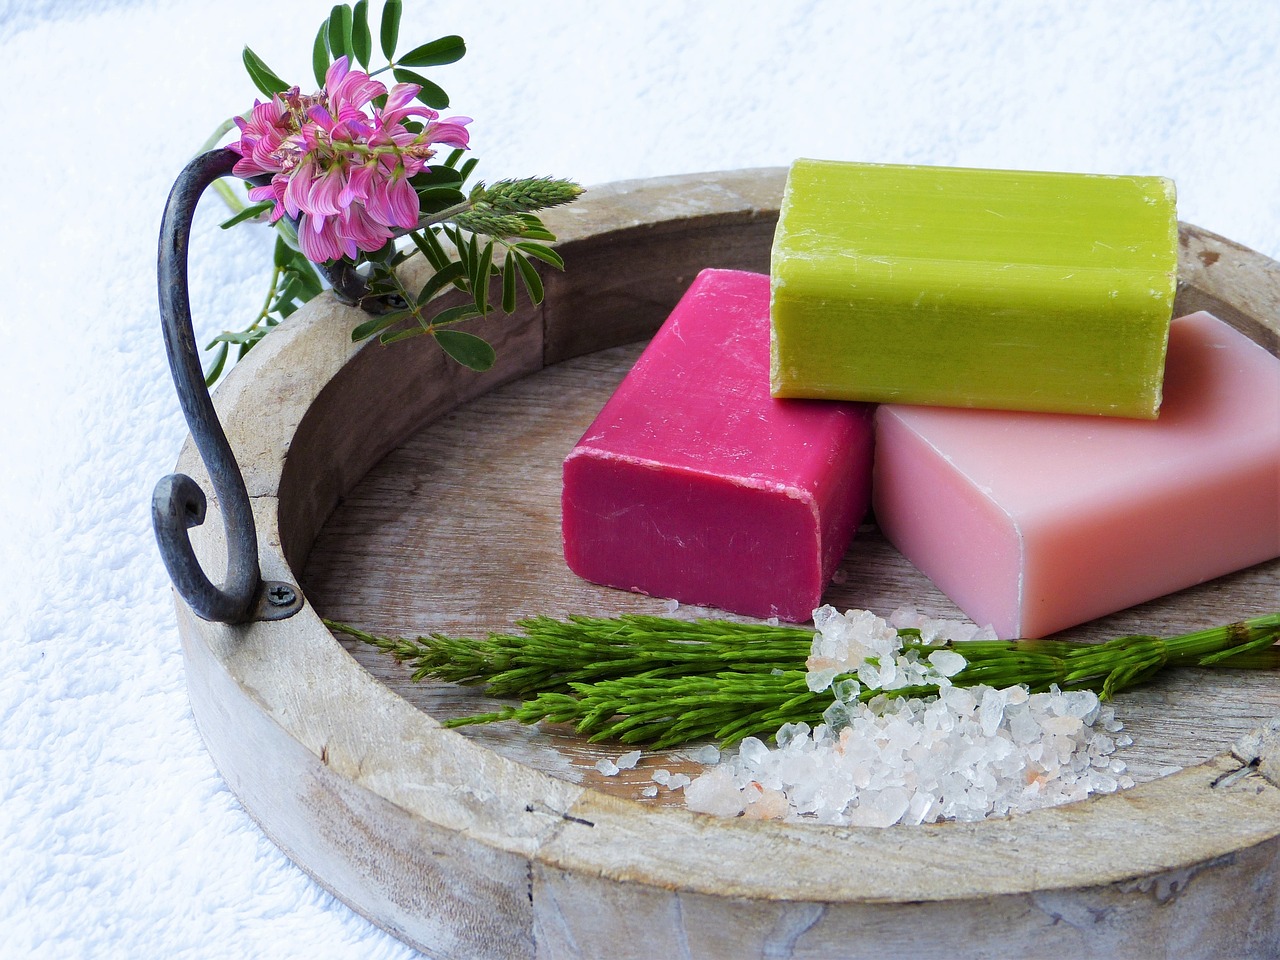 How to Make Soap: A Practical Guide for People Who Don’t Trust Store-Bought Cleanliness